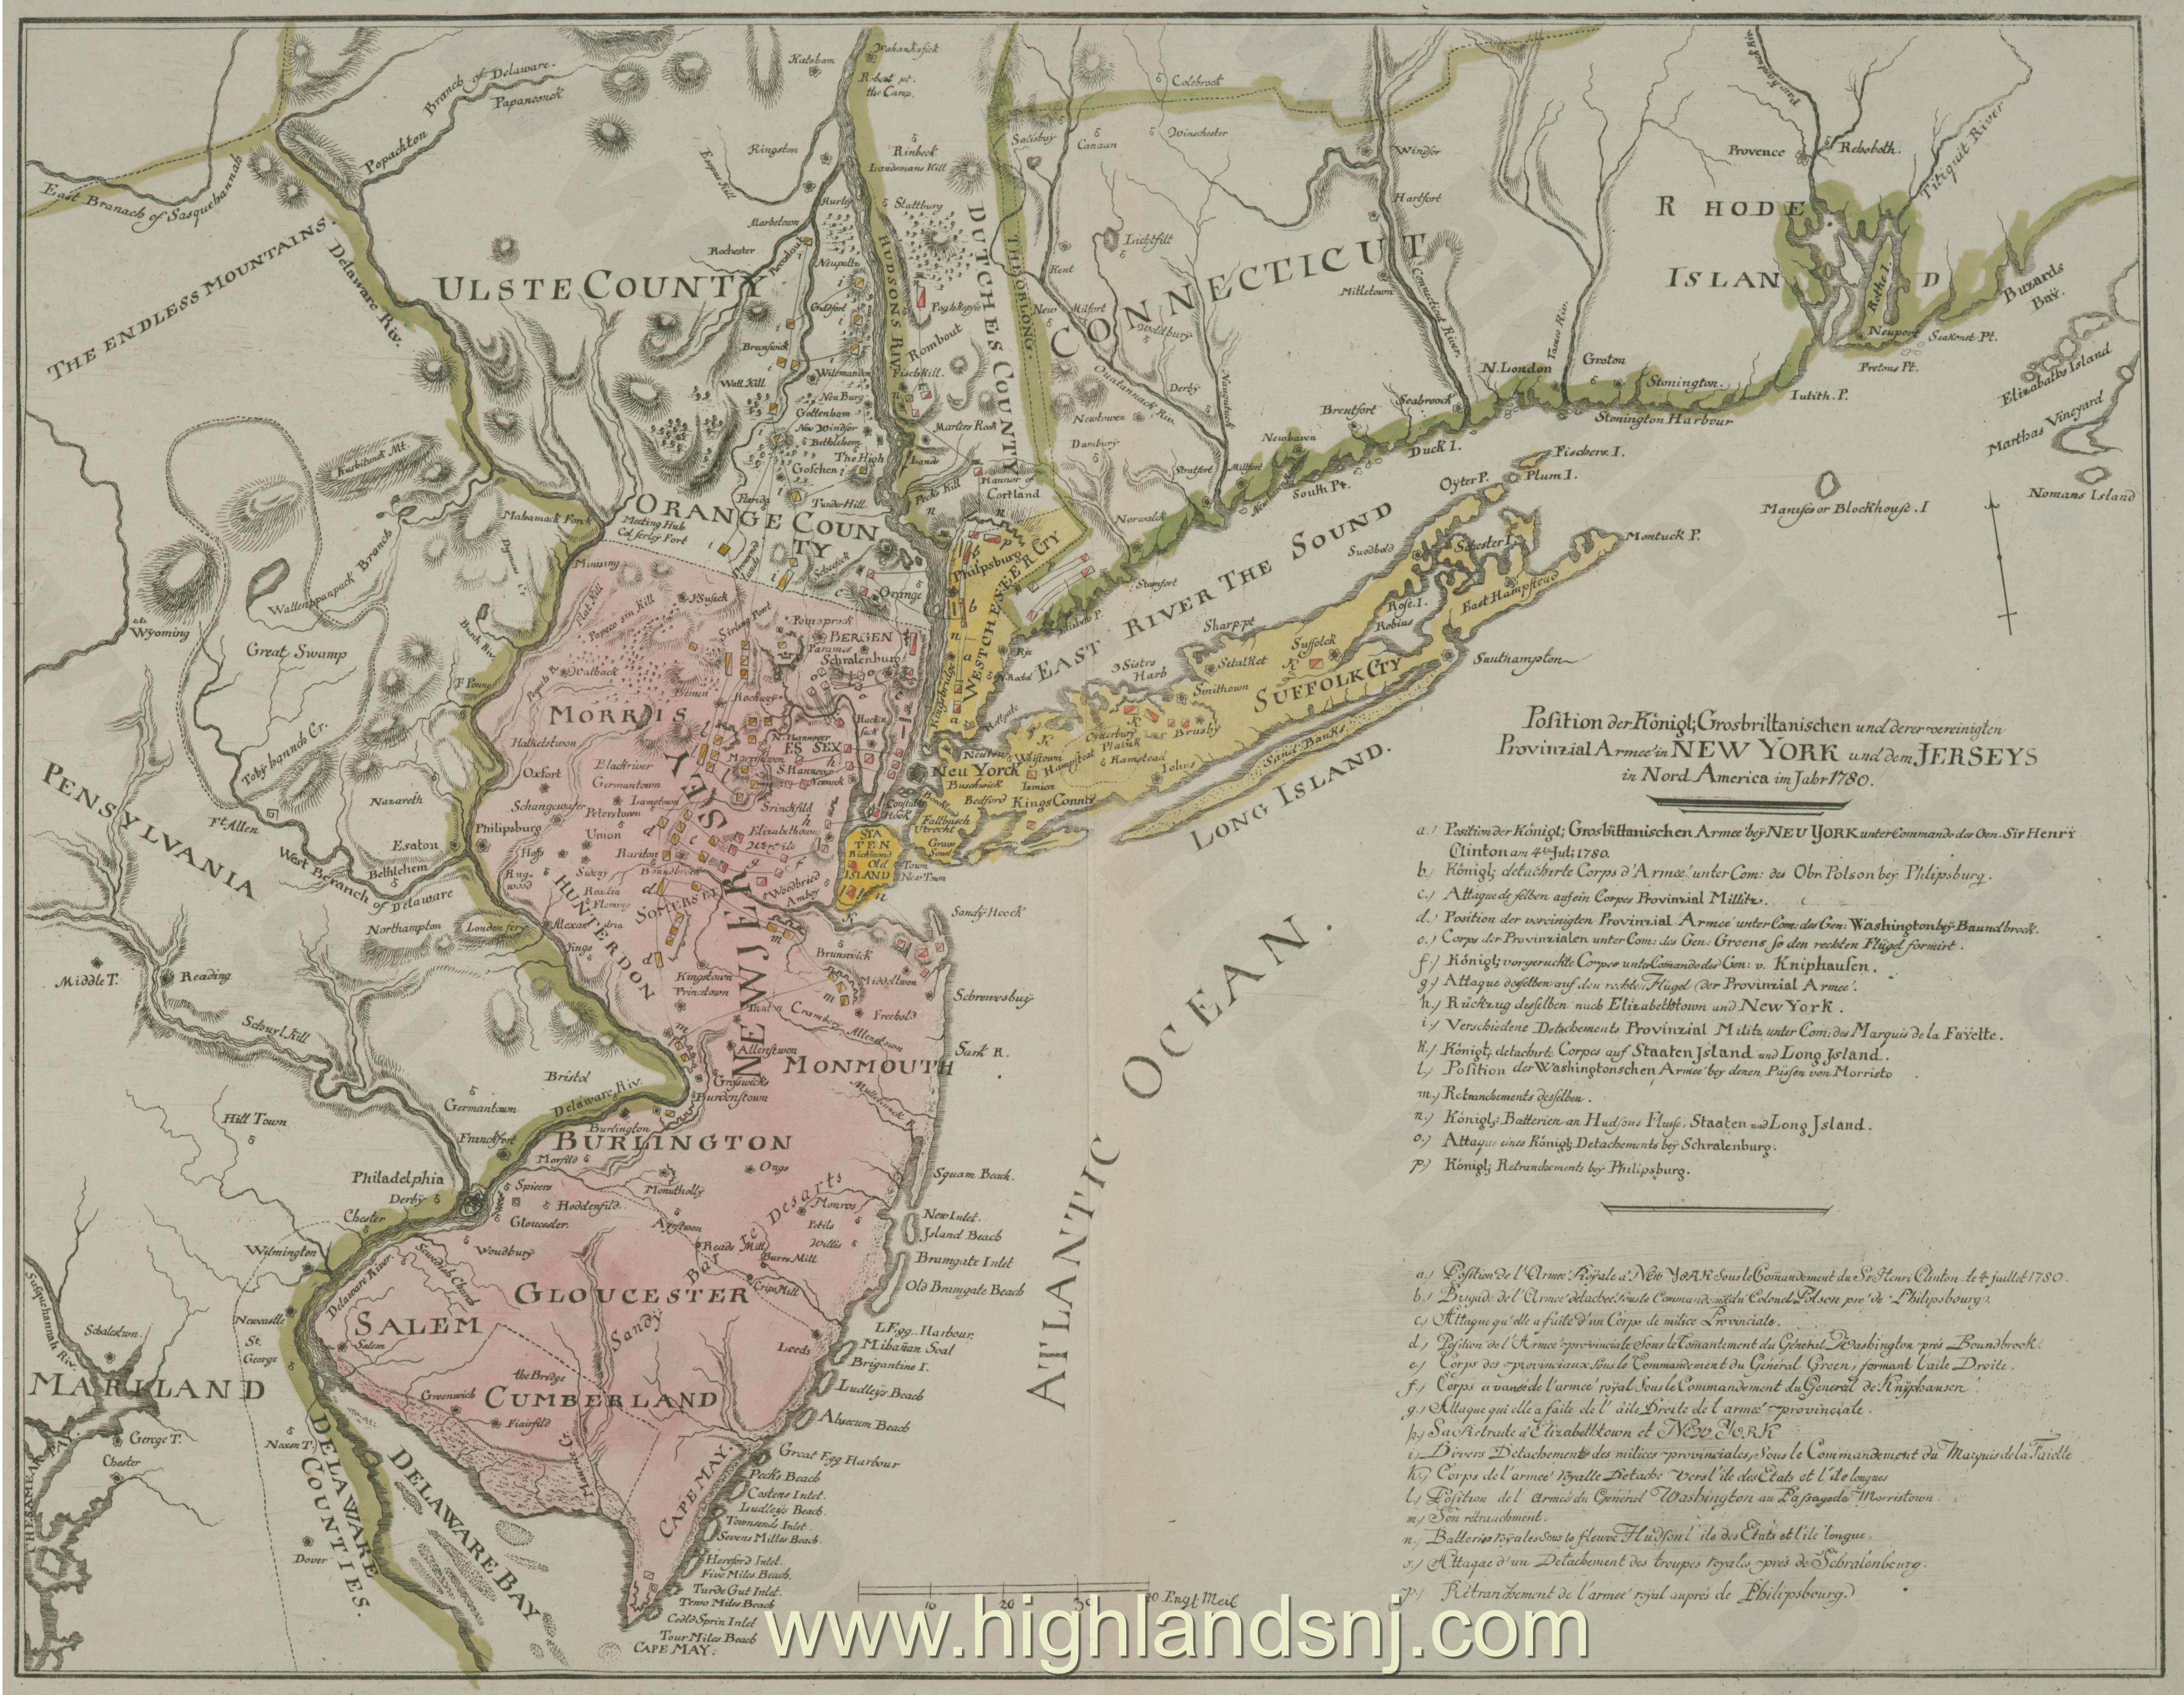 1777 The Province of New Jersey  divided into East and West commonly called the Jerseys nypldigitalcollections